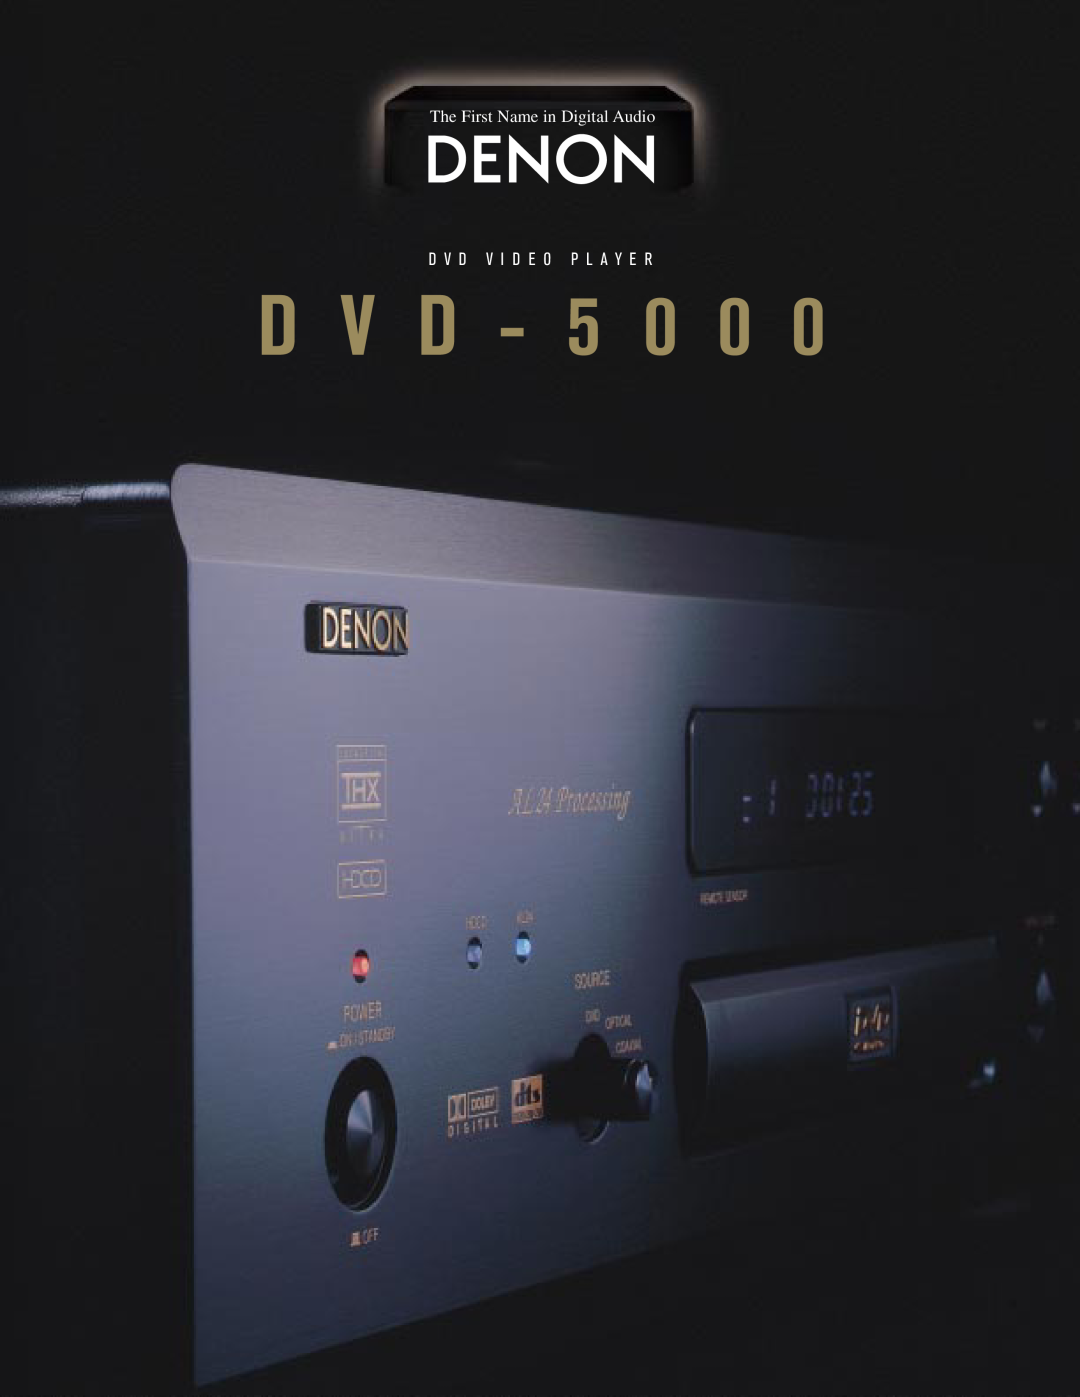 Denon DVD-5000 manual D V D - 5 0 0, The First Name in Digital Audio, D V D V I D E O P L A Y E R 